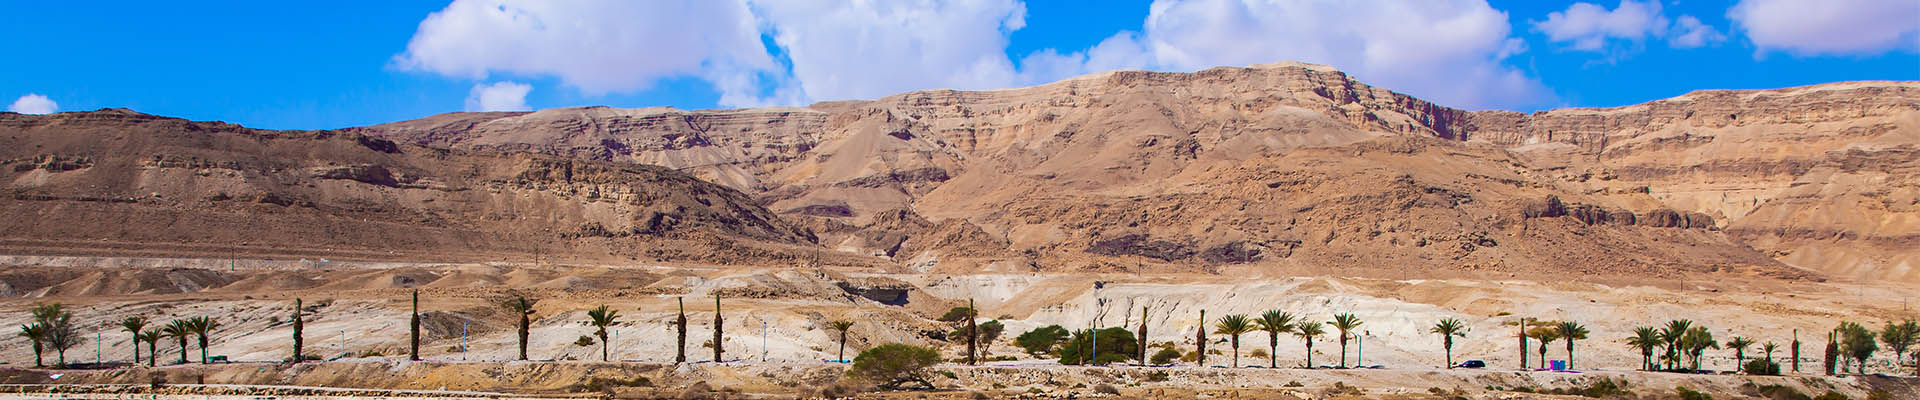 Qumram, Qaser El Yahud & the Dead Sea Private Day Tour - In the Footsteps of John the Baptist